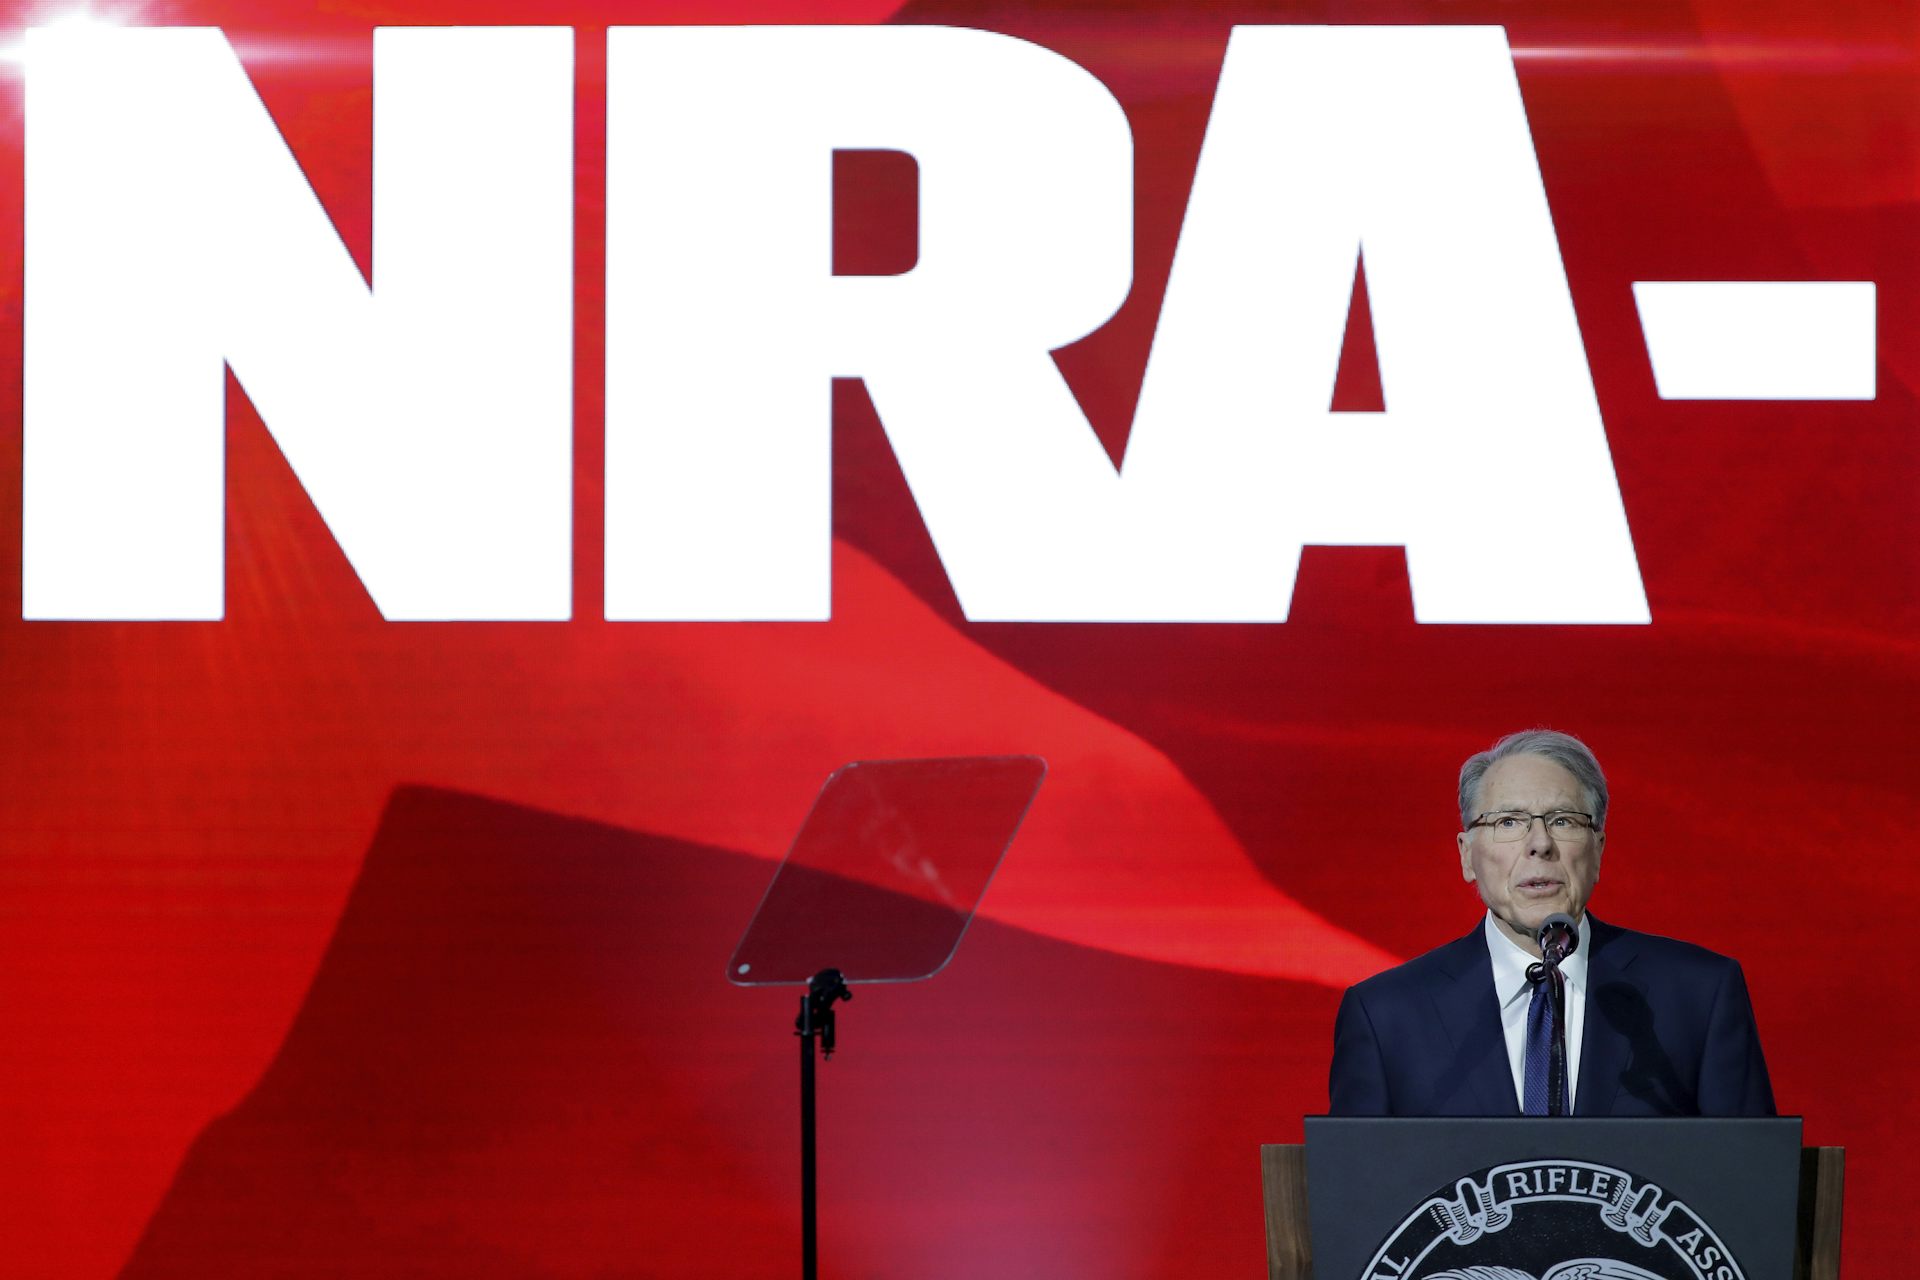 NRA Loses New York Corruption Trial Over Squandered Funds – Retired Longtime Leader Wayne Lapierre Must Repay Millions of Dollars